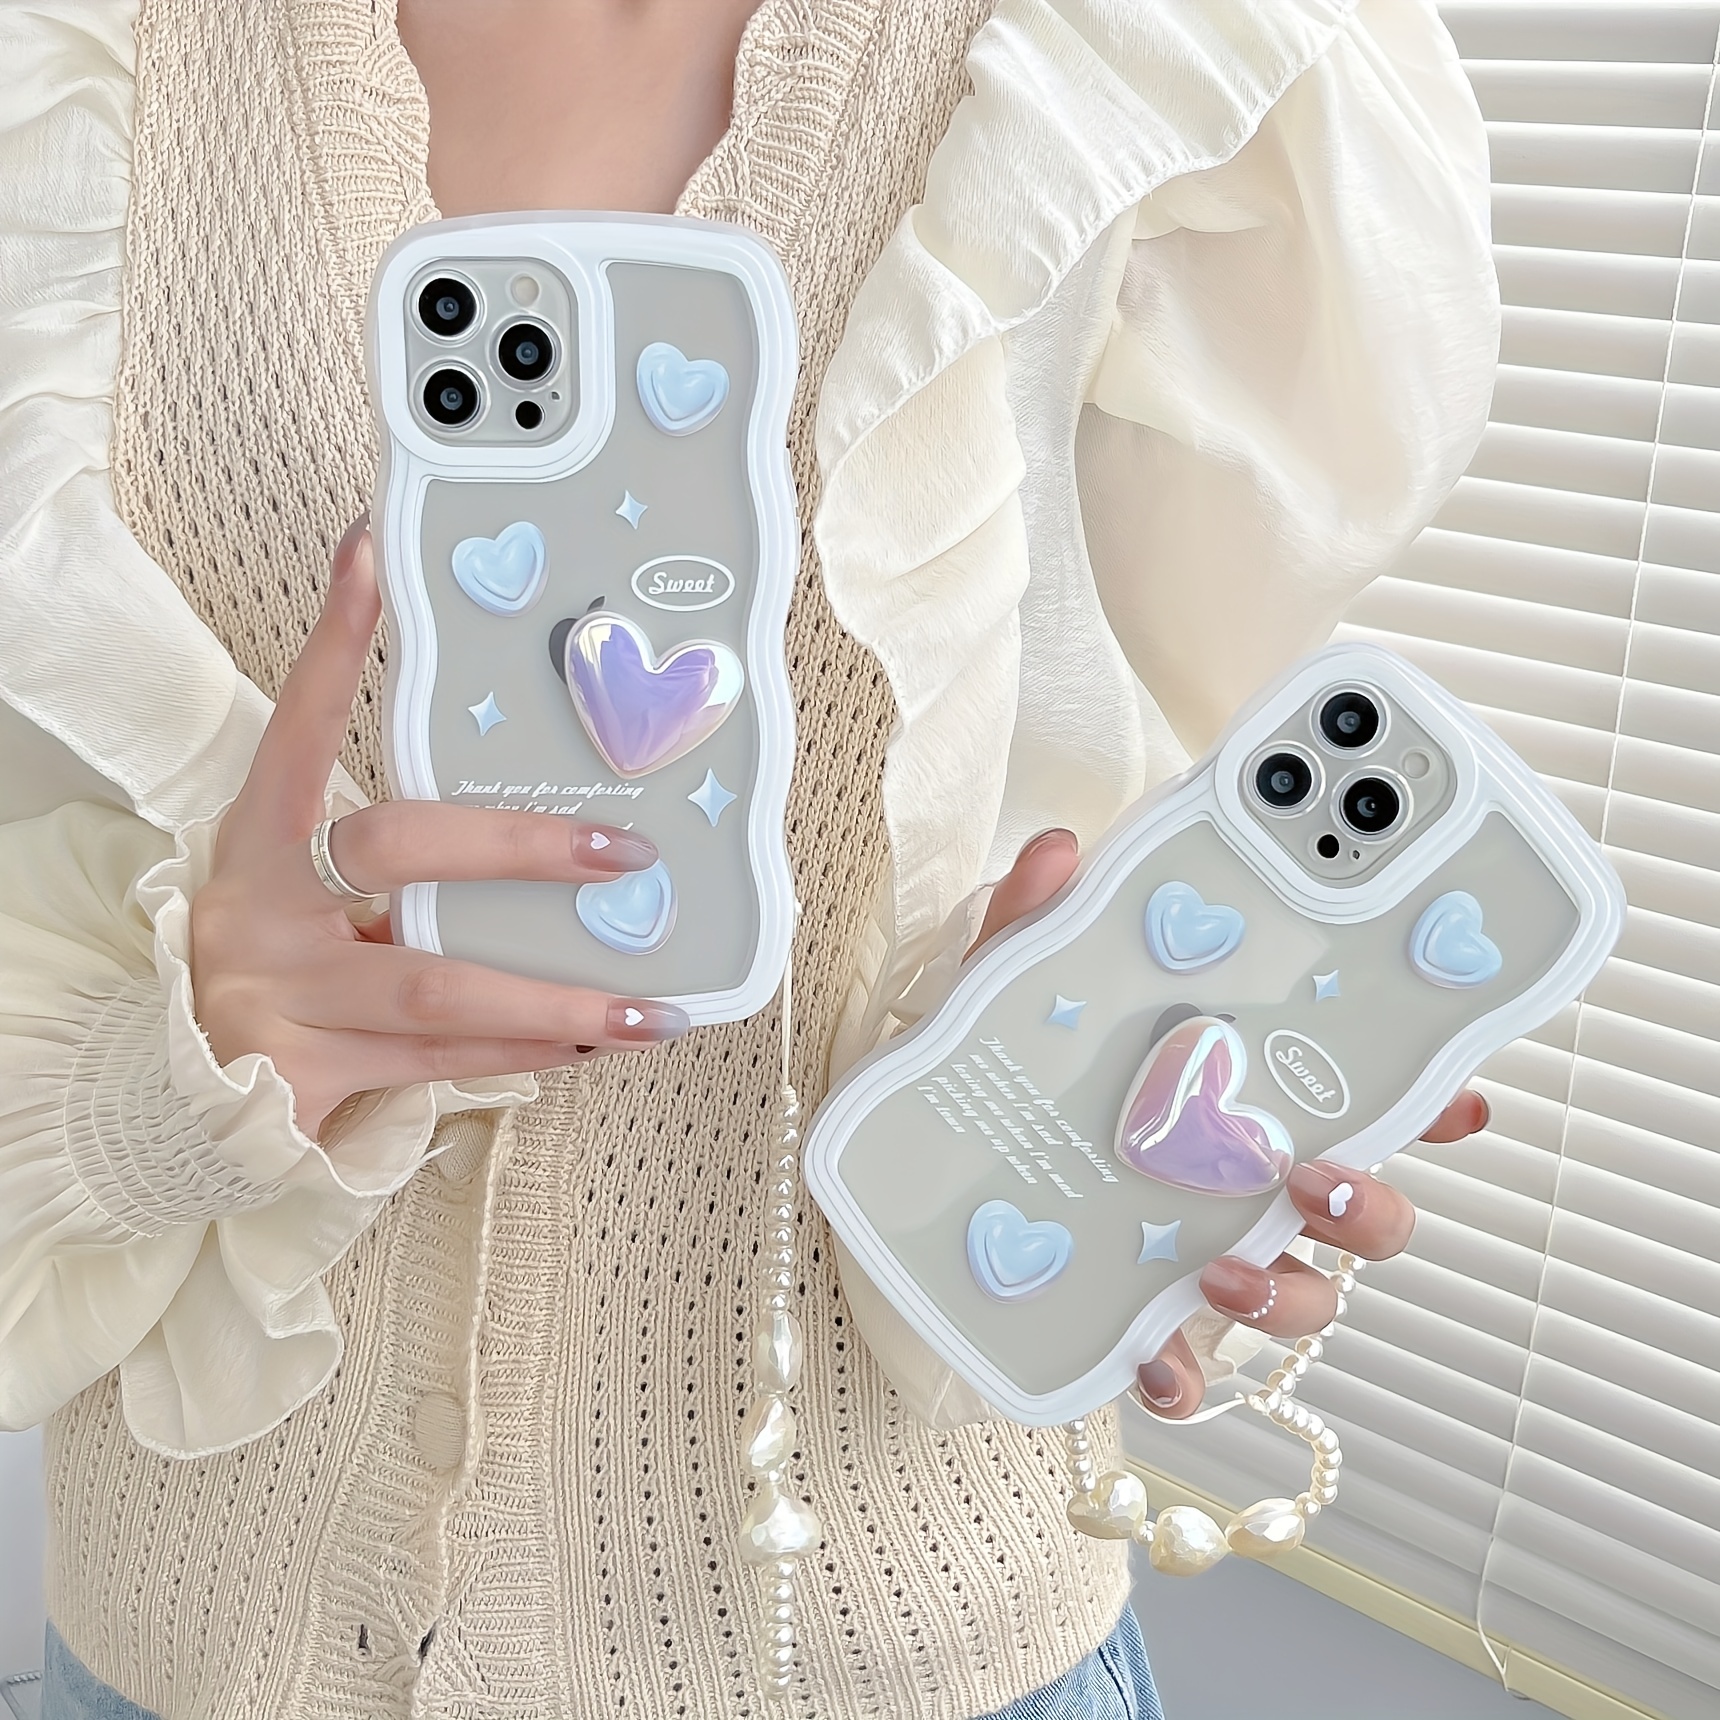 For Iphone 14 Pro Max Case Cute Love Heart Design For Women Girls